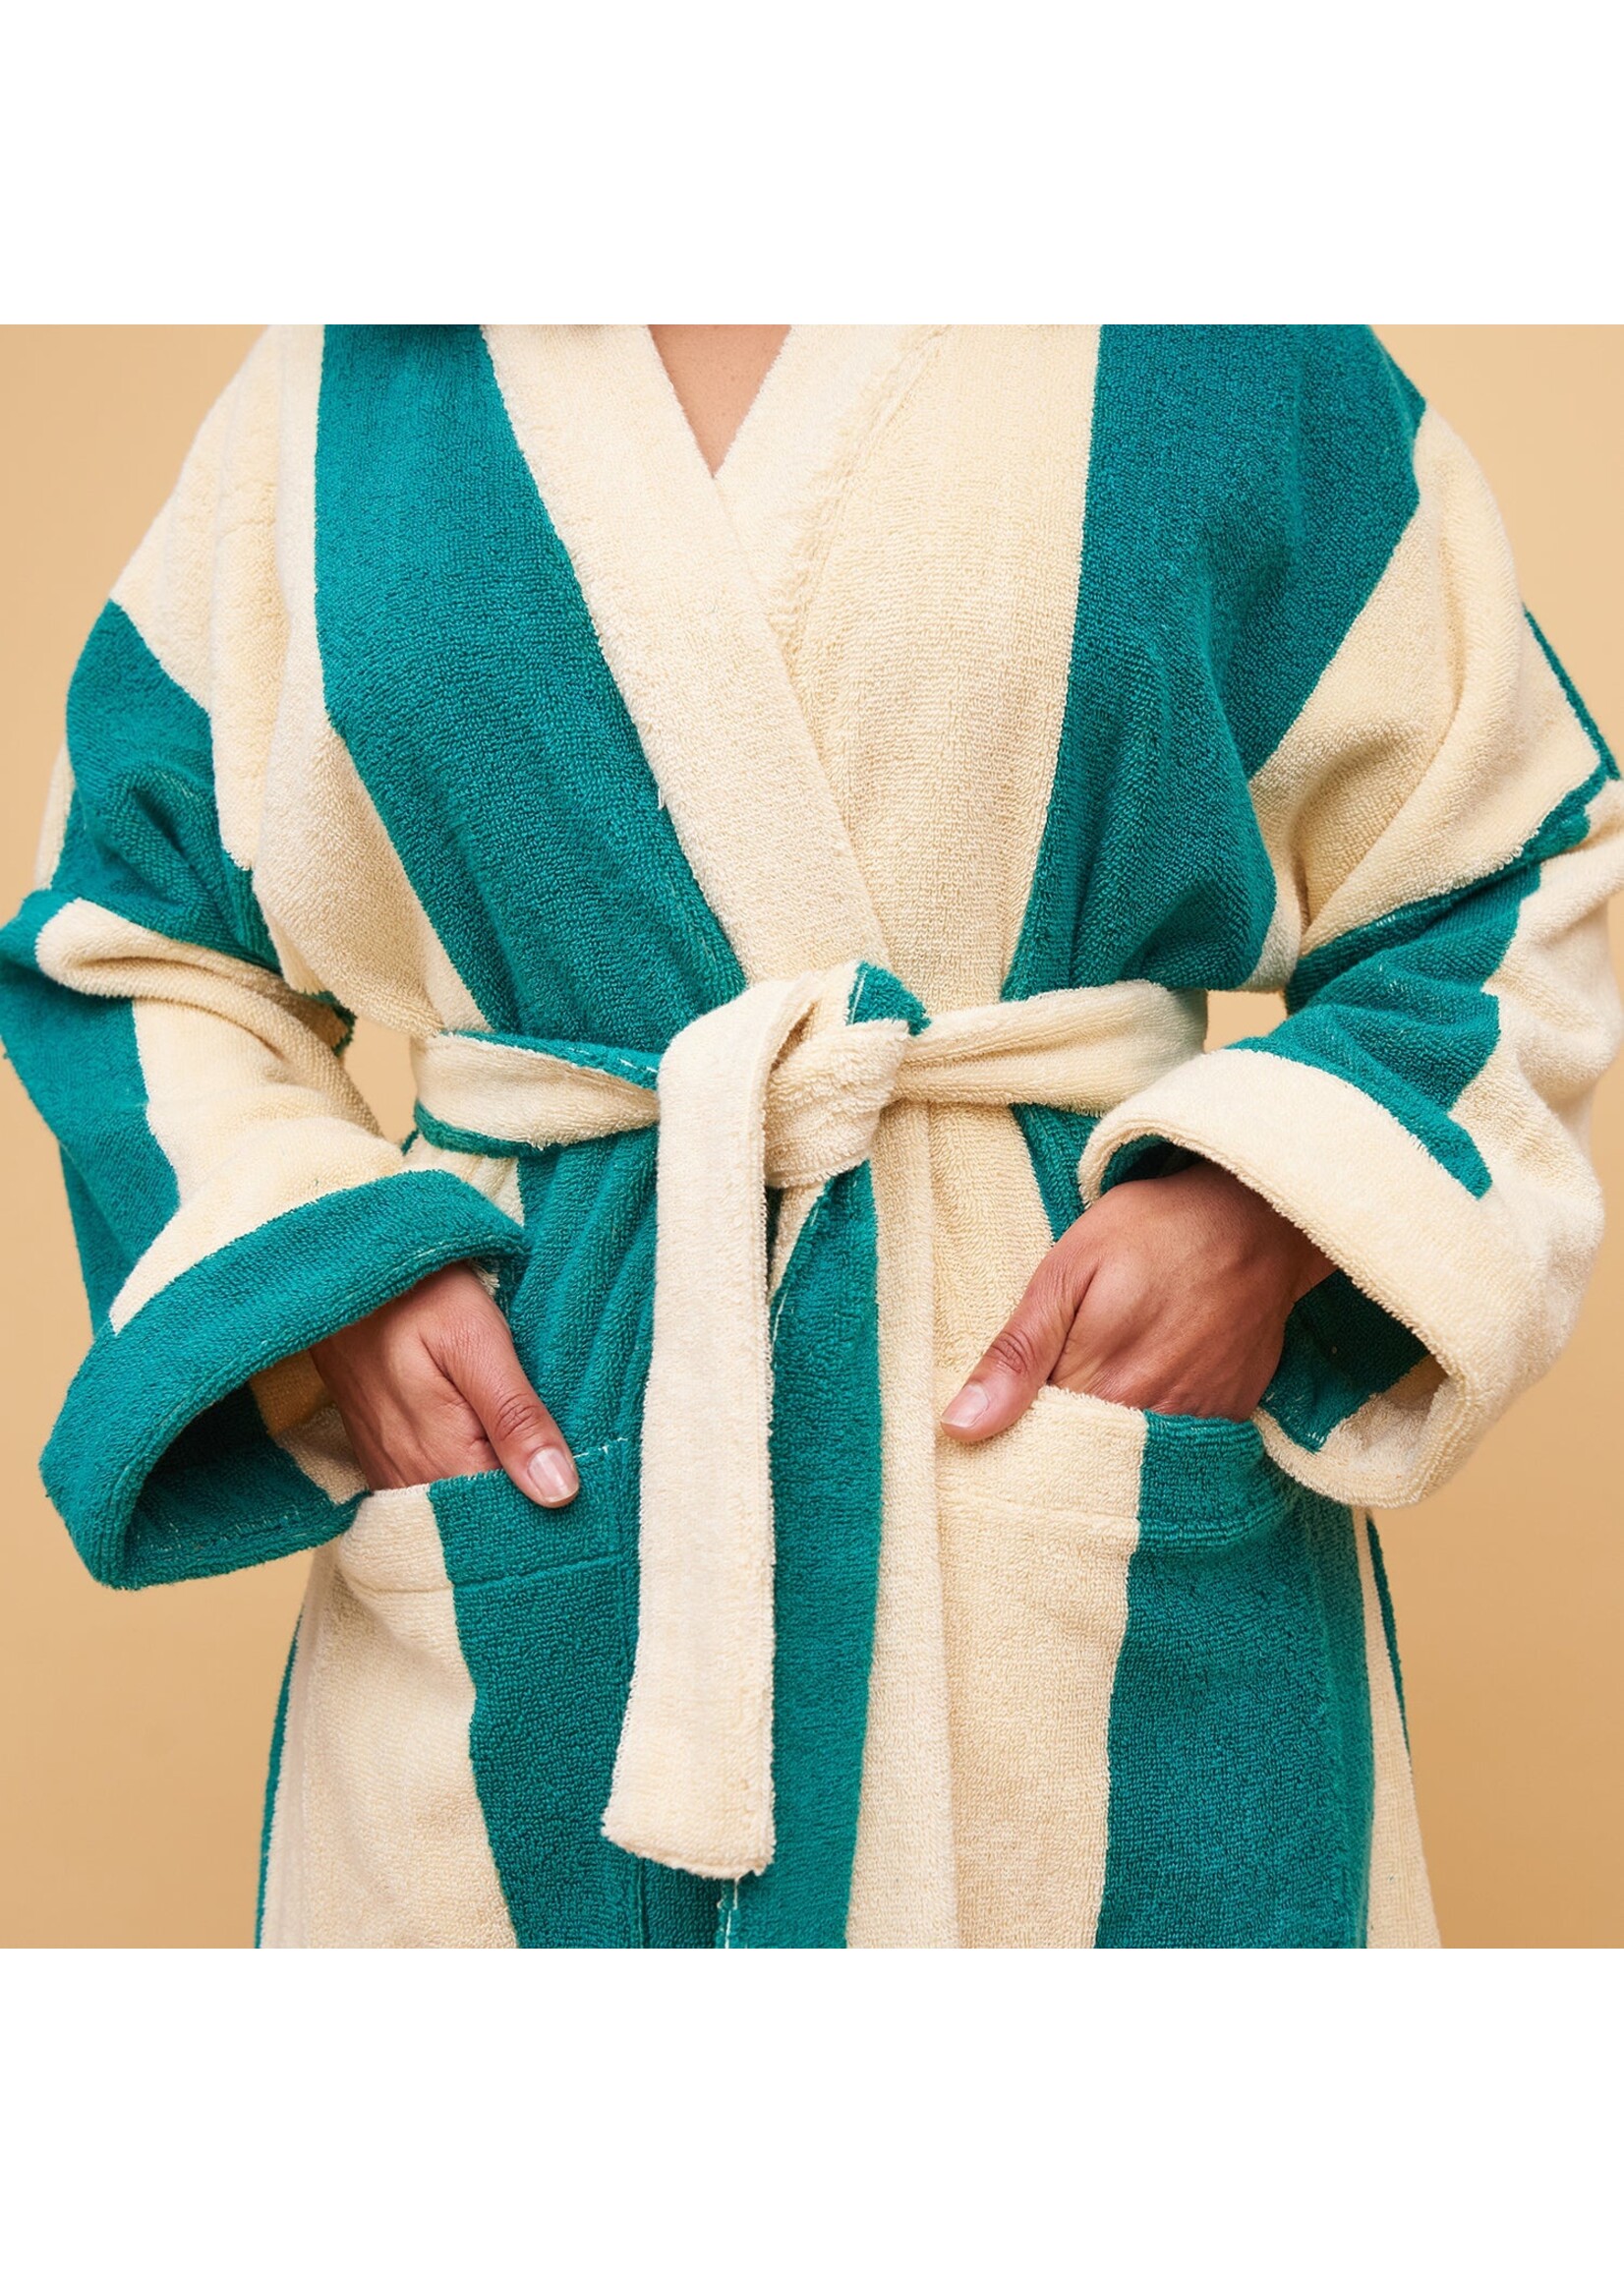 Sage and Clare Halifax Towelling Robe - Teal M / L